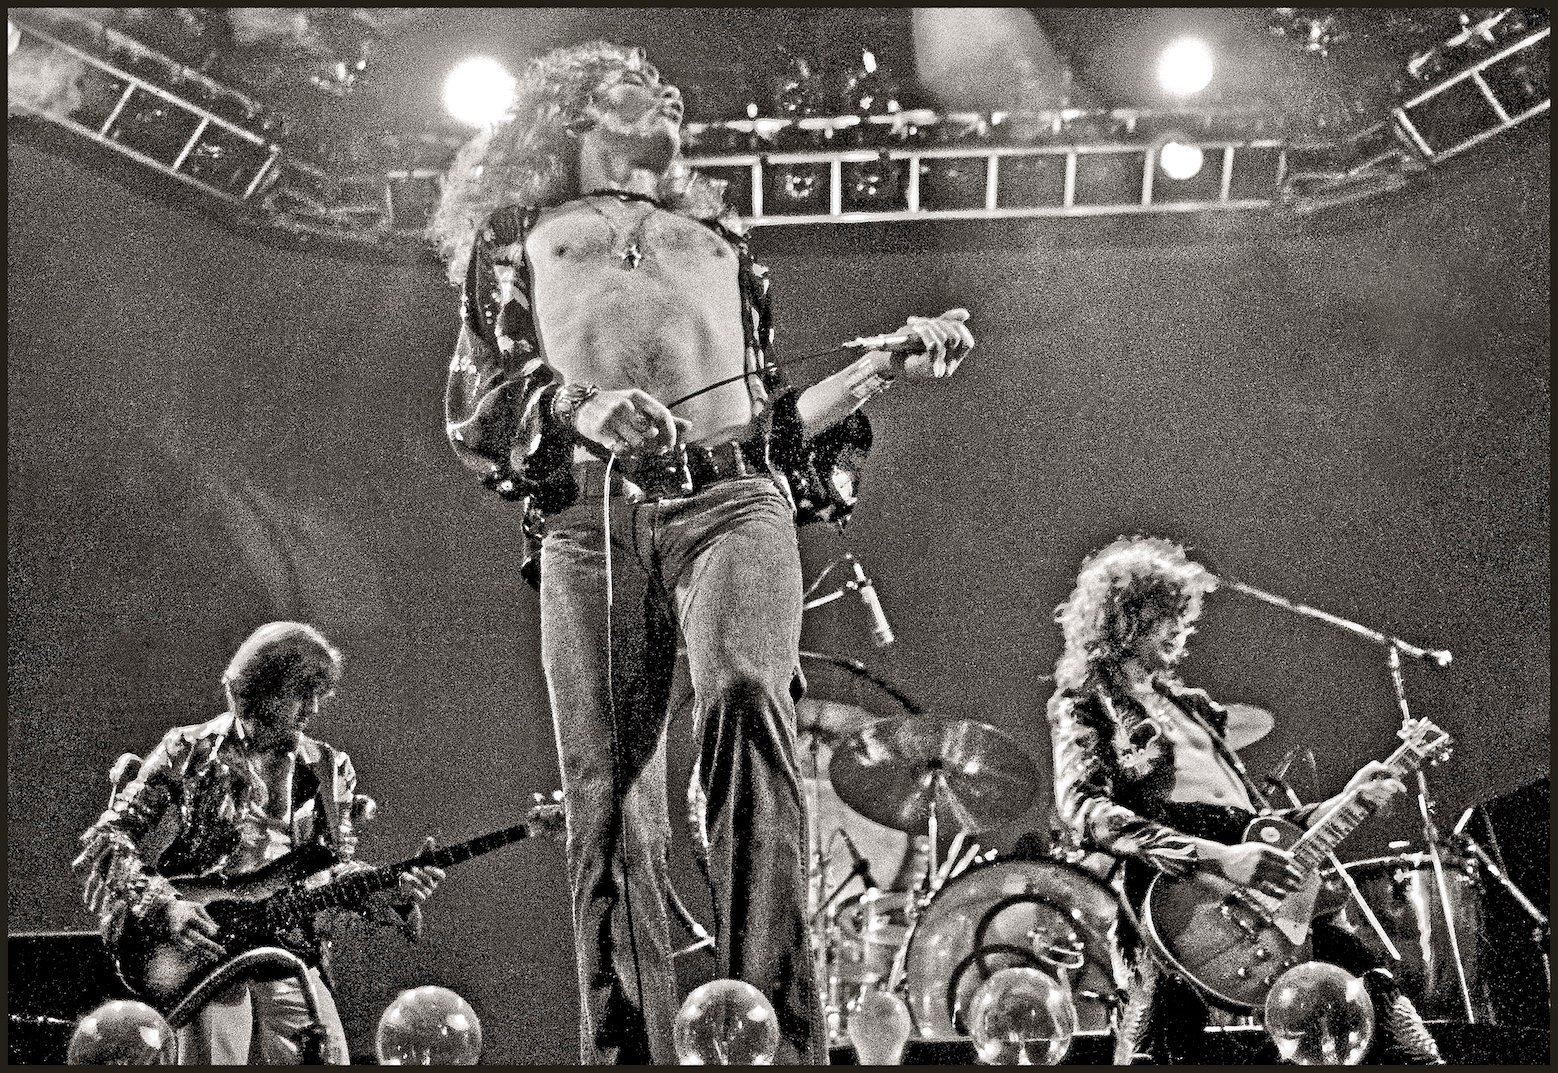 Led Zeppelin perform at Earls Court in London in 1975